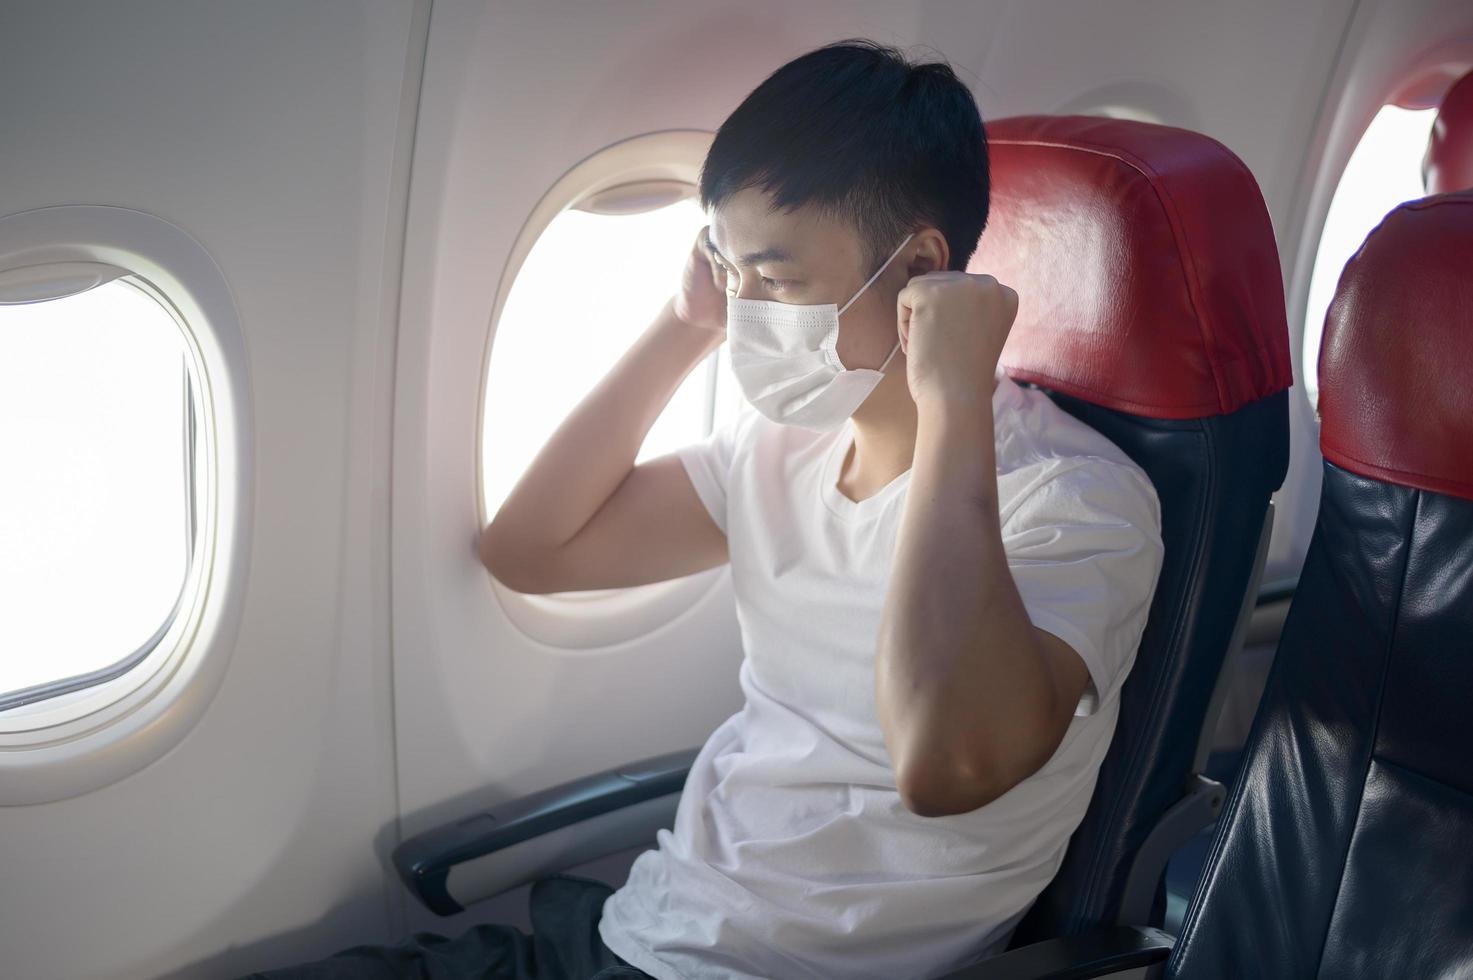 A travelling man is wearing protective mask onboard in the aircraft, travel under Covid-19 pandemic, safety travels, social distancing protocol, New normal travel concept photo